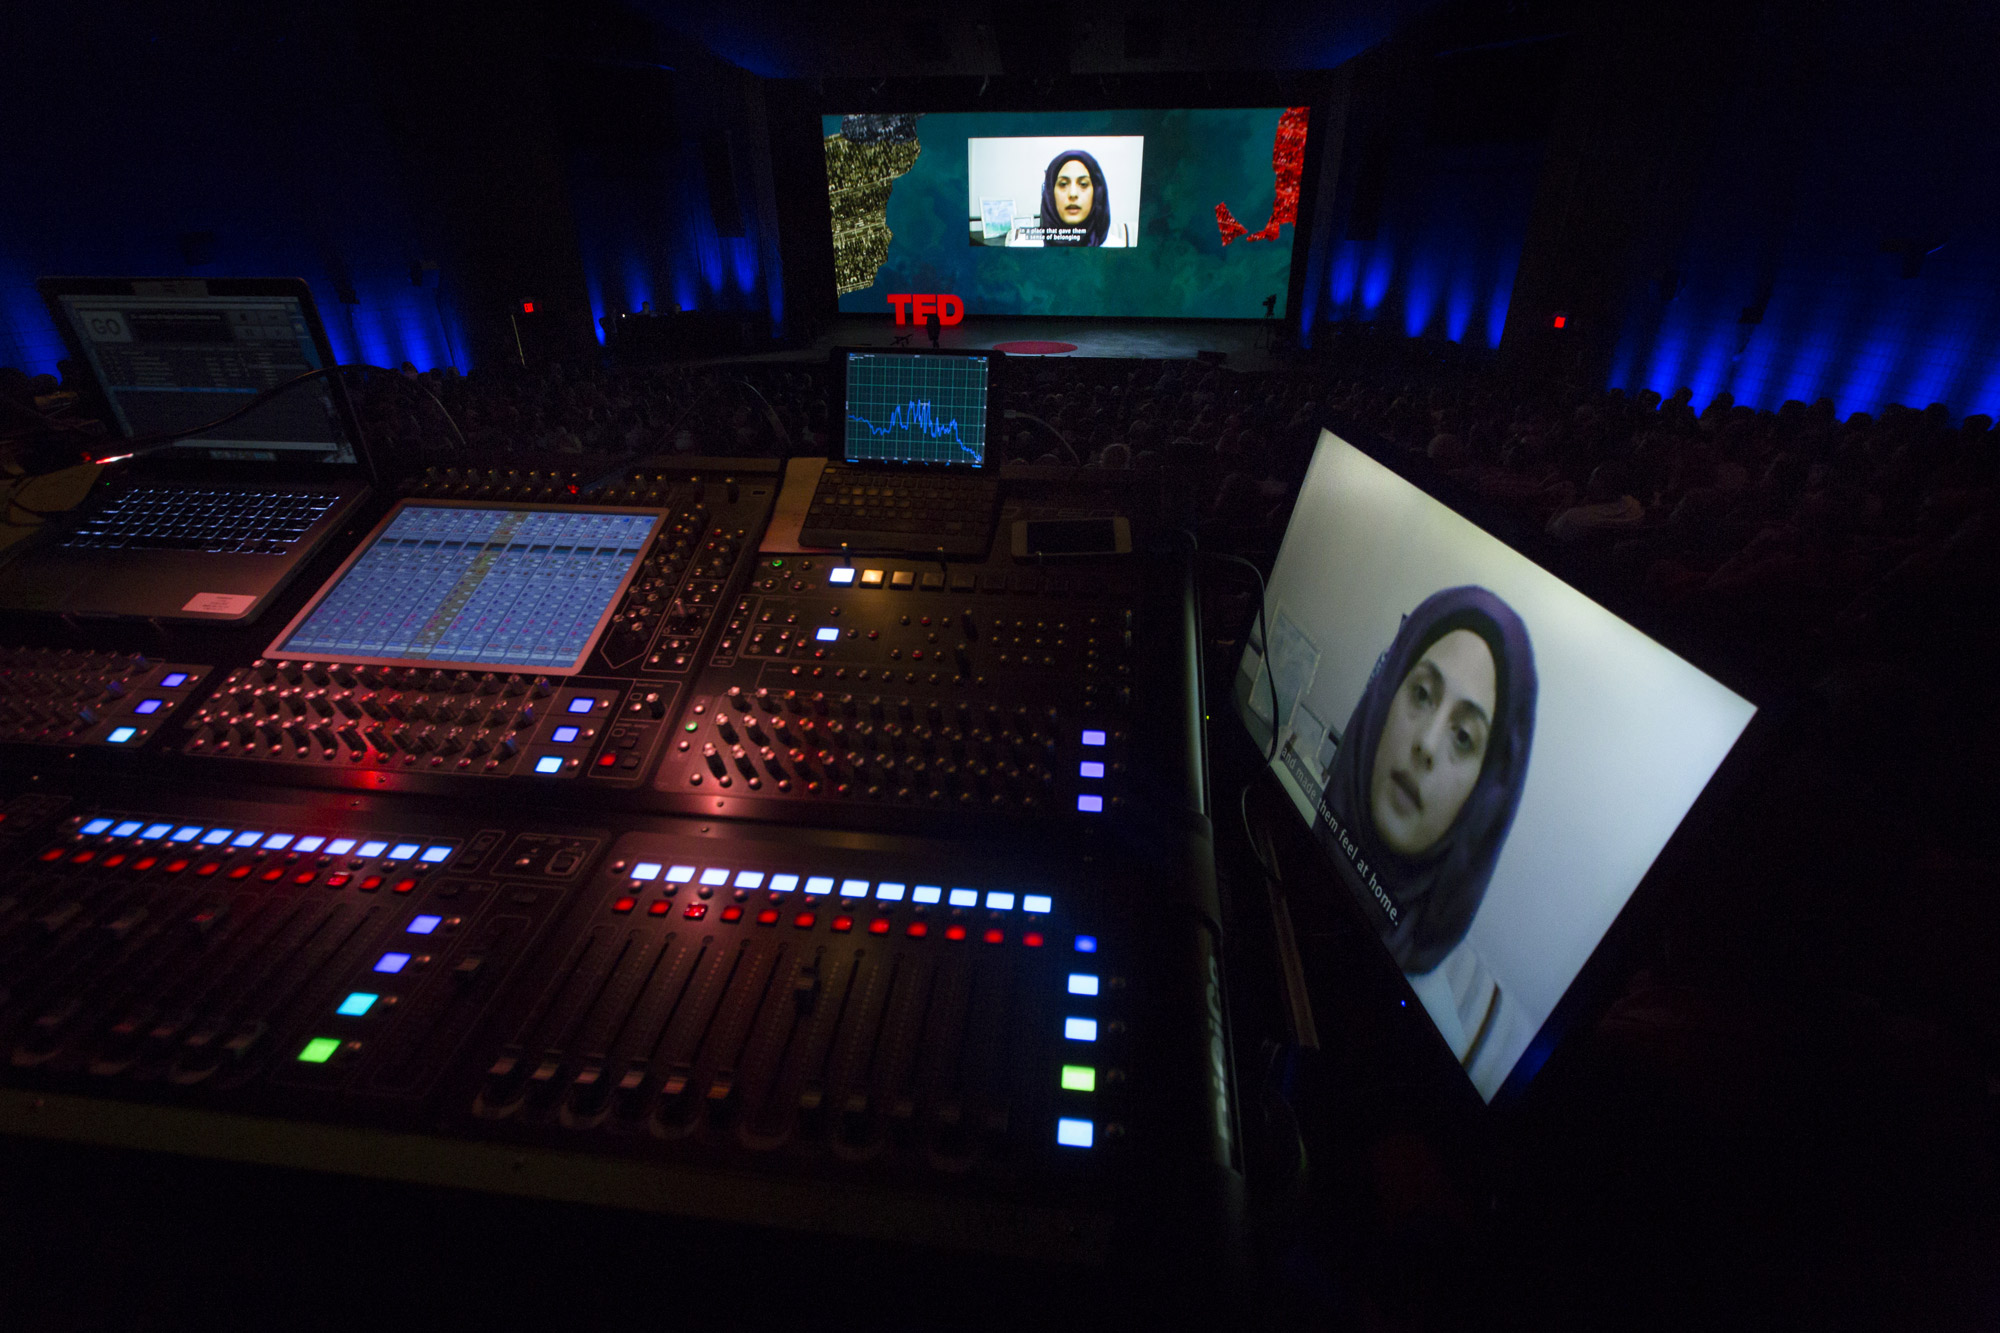 Recorded over Skype, young architect Marwa Al-Sabouni talks about life right now in Homs, Syria -- and suggests that the built environment played a role in the country's deadly conflict. Photo: Ryan Lash